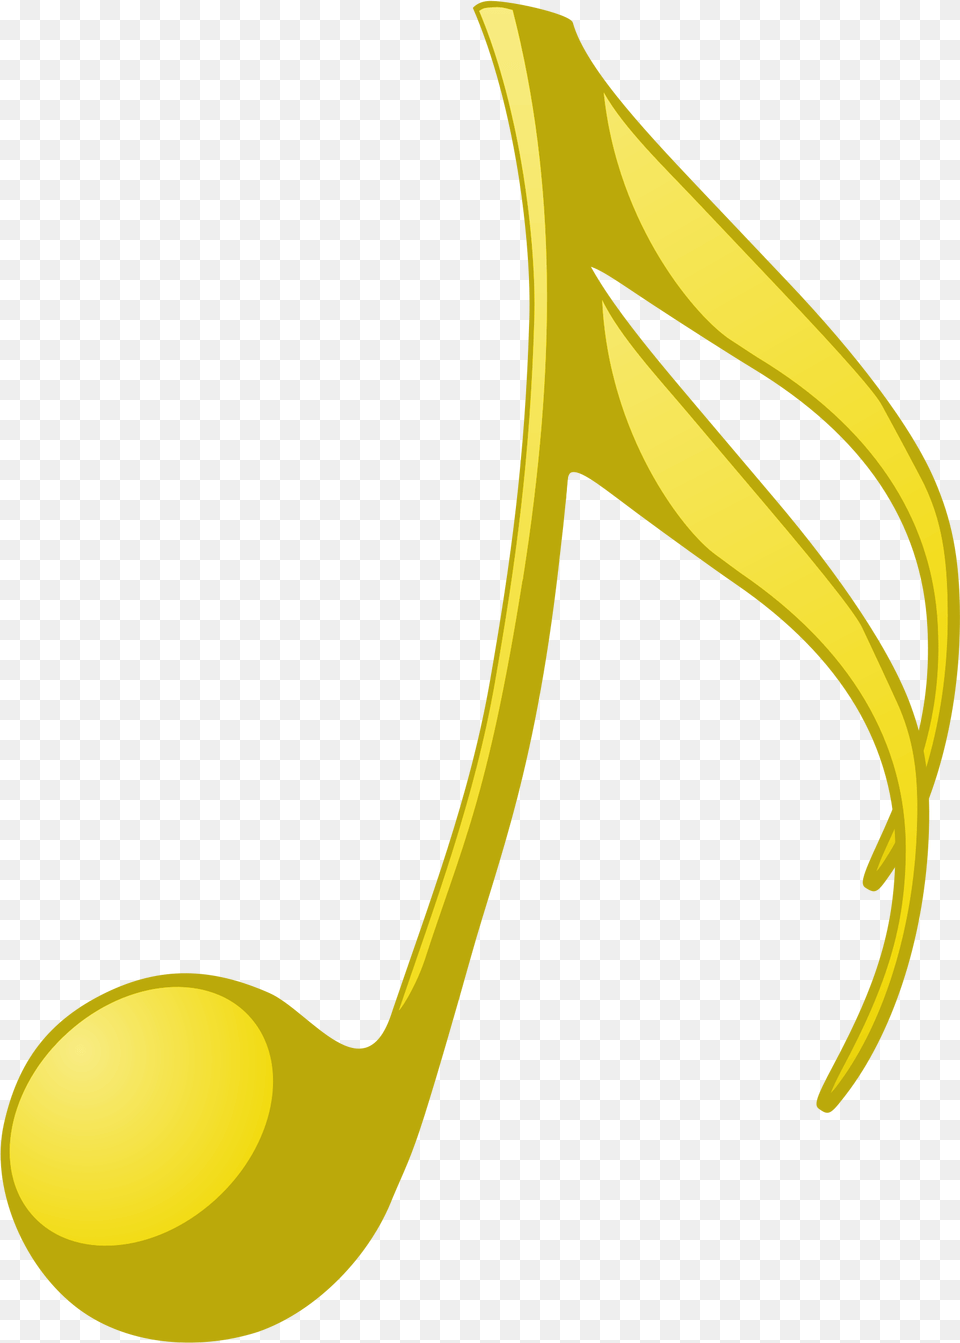 Download Music Note Image With No Background Pngkeycom Yellow Music Note, Cutlery, Spoon, Kitchen Utensil, Ladle Free Png